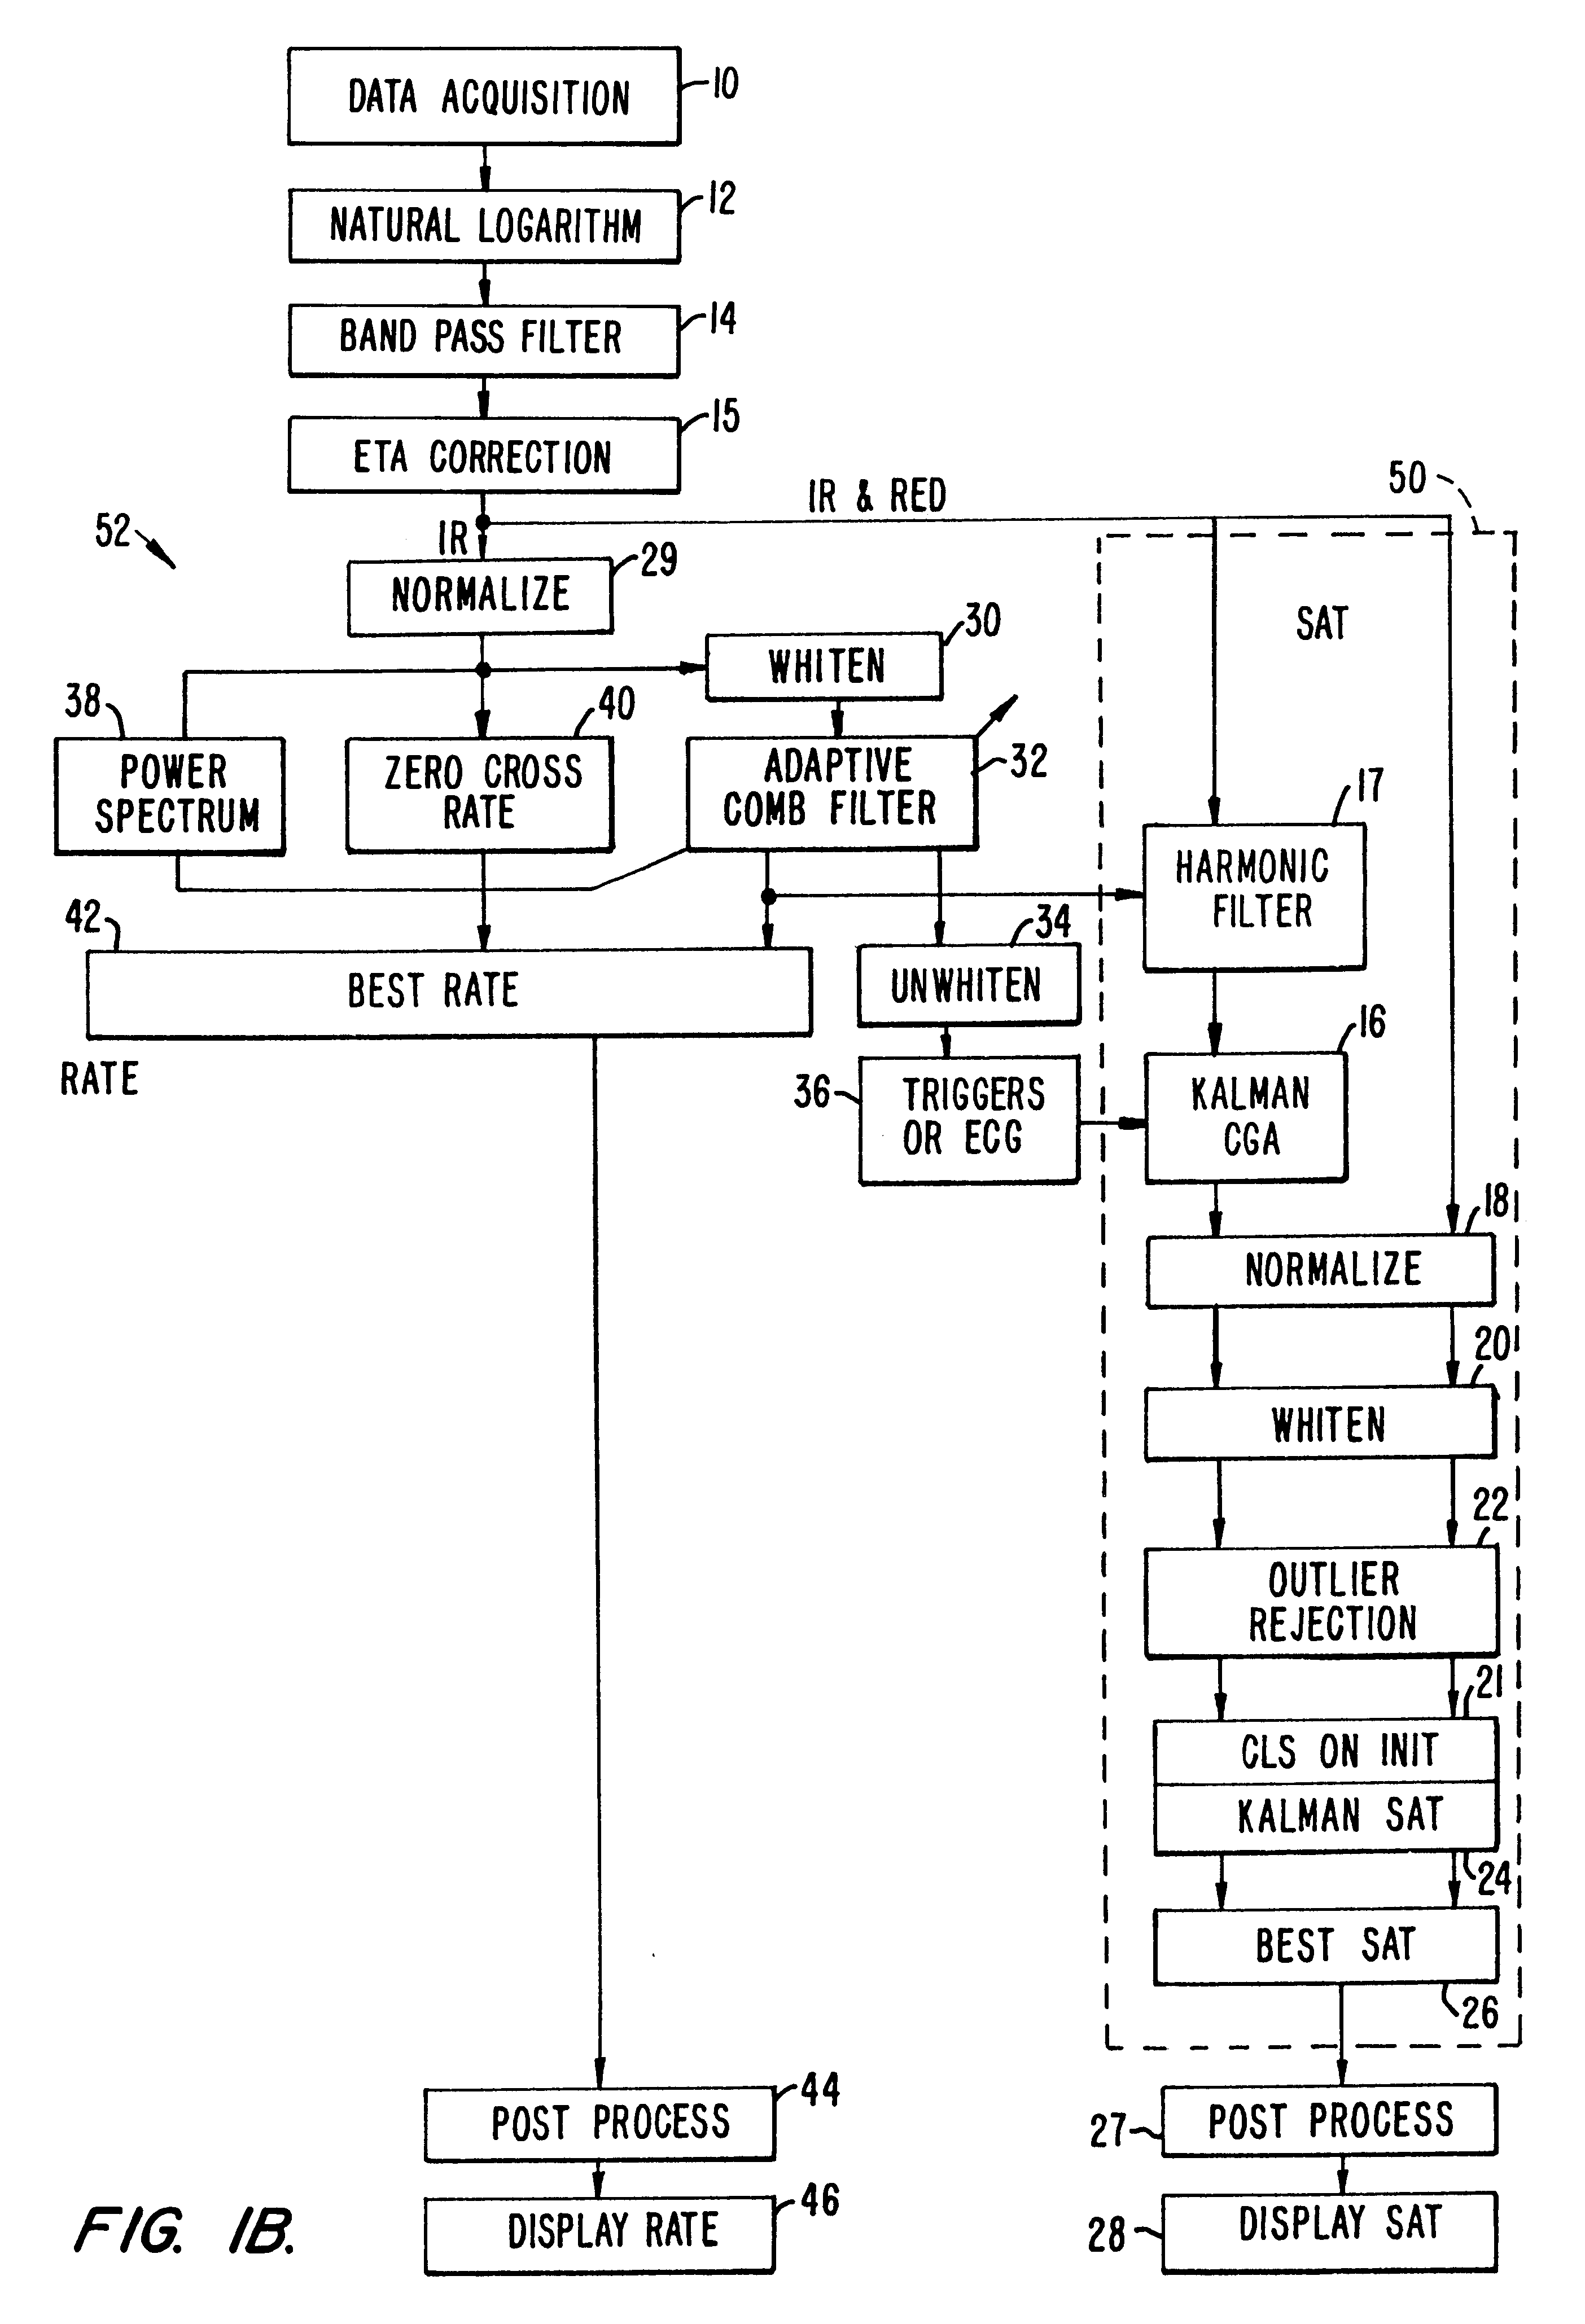 Method and apparatus for estimating physiological parameters using model-based adaptive filtering